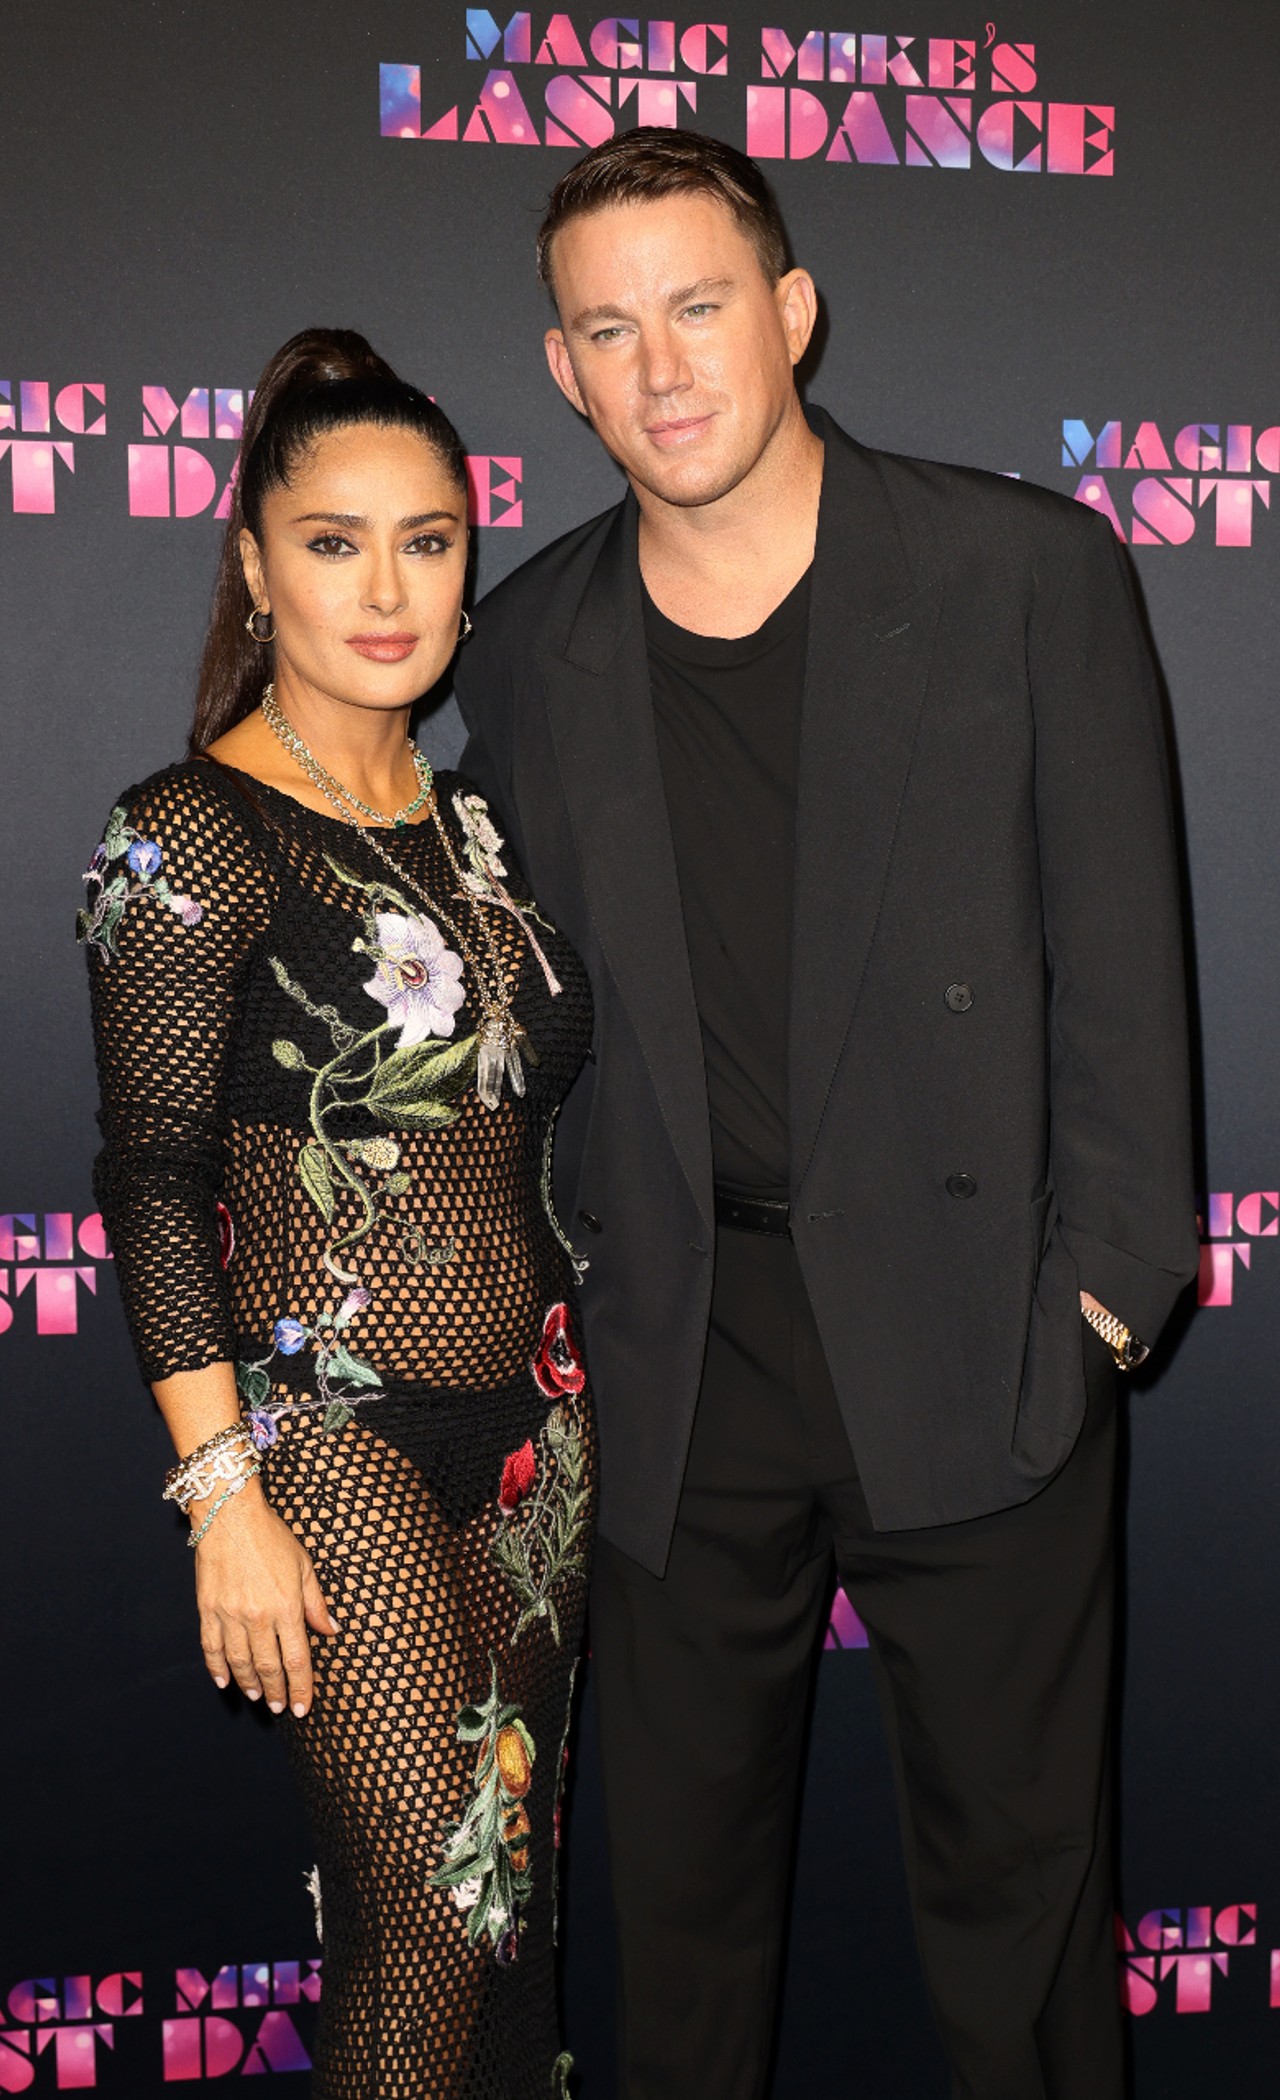 Salma Hayek and Channing Tatum arm in arm at the Magic Mike's Last Dance premiere